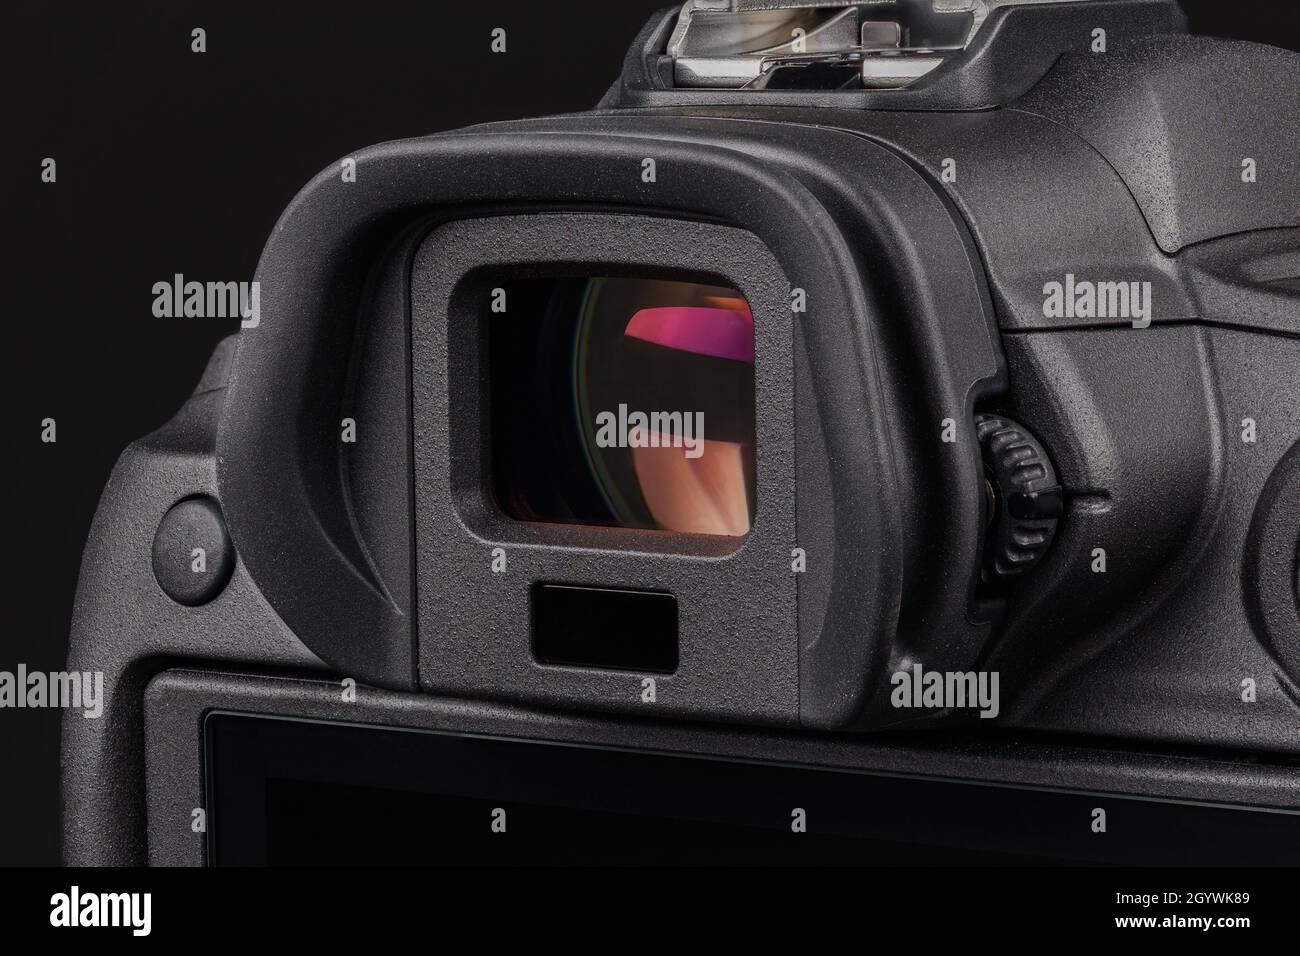 the eyepiece of the digital viewfinder of one of the best high-end digital camera - close-up with focus stacking technique Stock Photo